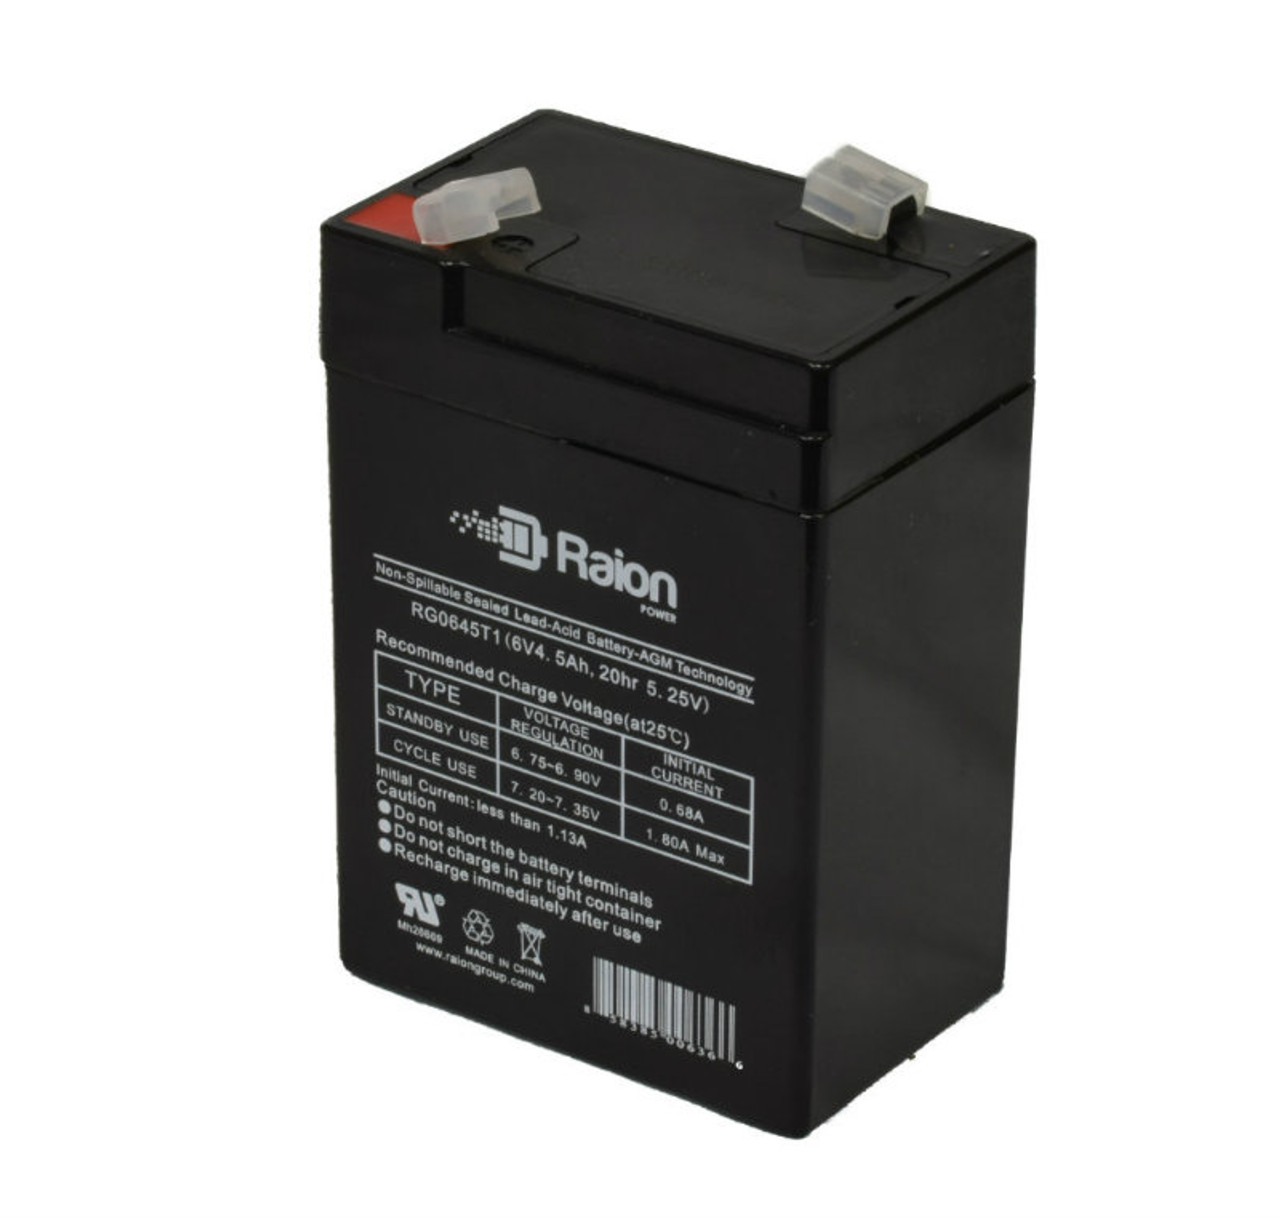 Raion Power RG0645T1 6V 4.5Ah Replacement Battery Cartridge for Bird Products Corp Avain Portable Ventilator